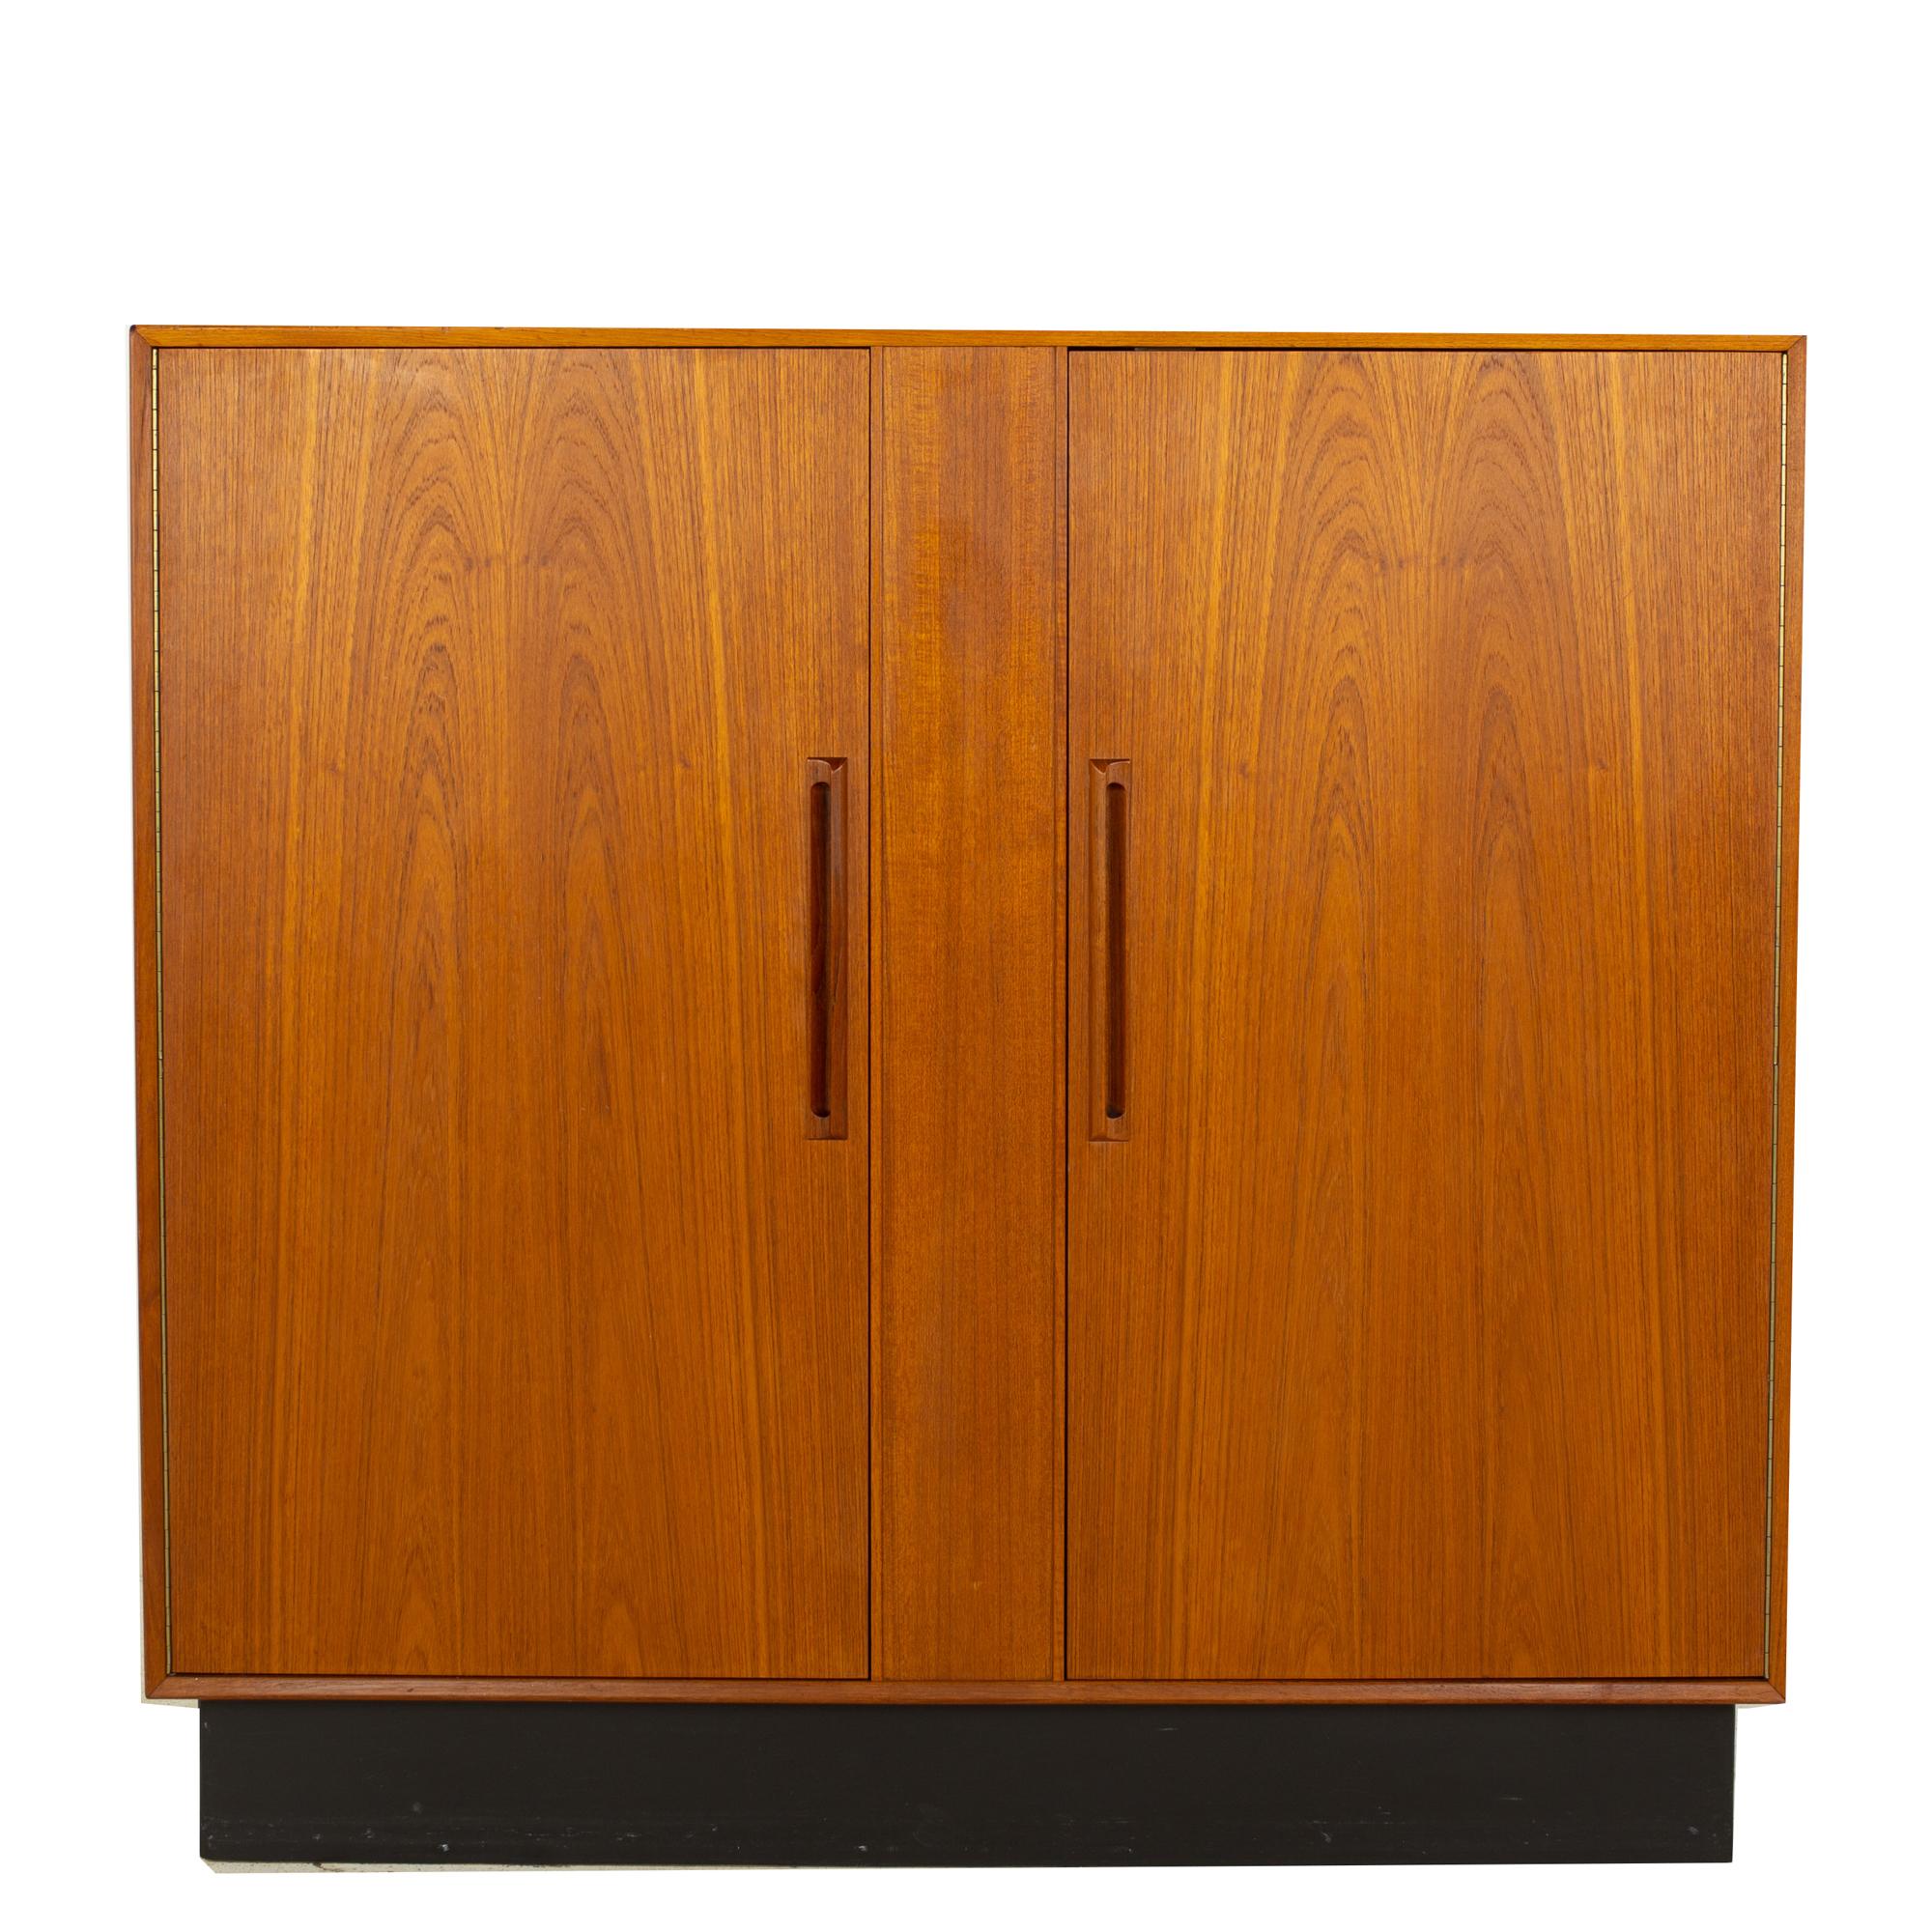 Westnofa mid century teak gentleman's chest armoire
Armoire measures: 48 wide x 18 deep x 45.5 inches high

?All pieces of furniture can be had in what we call restored vintage condition. That means the piece is restored upon purchase so it’s